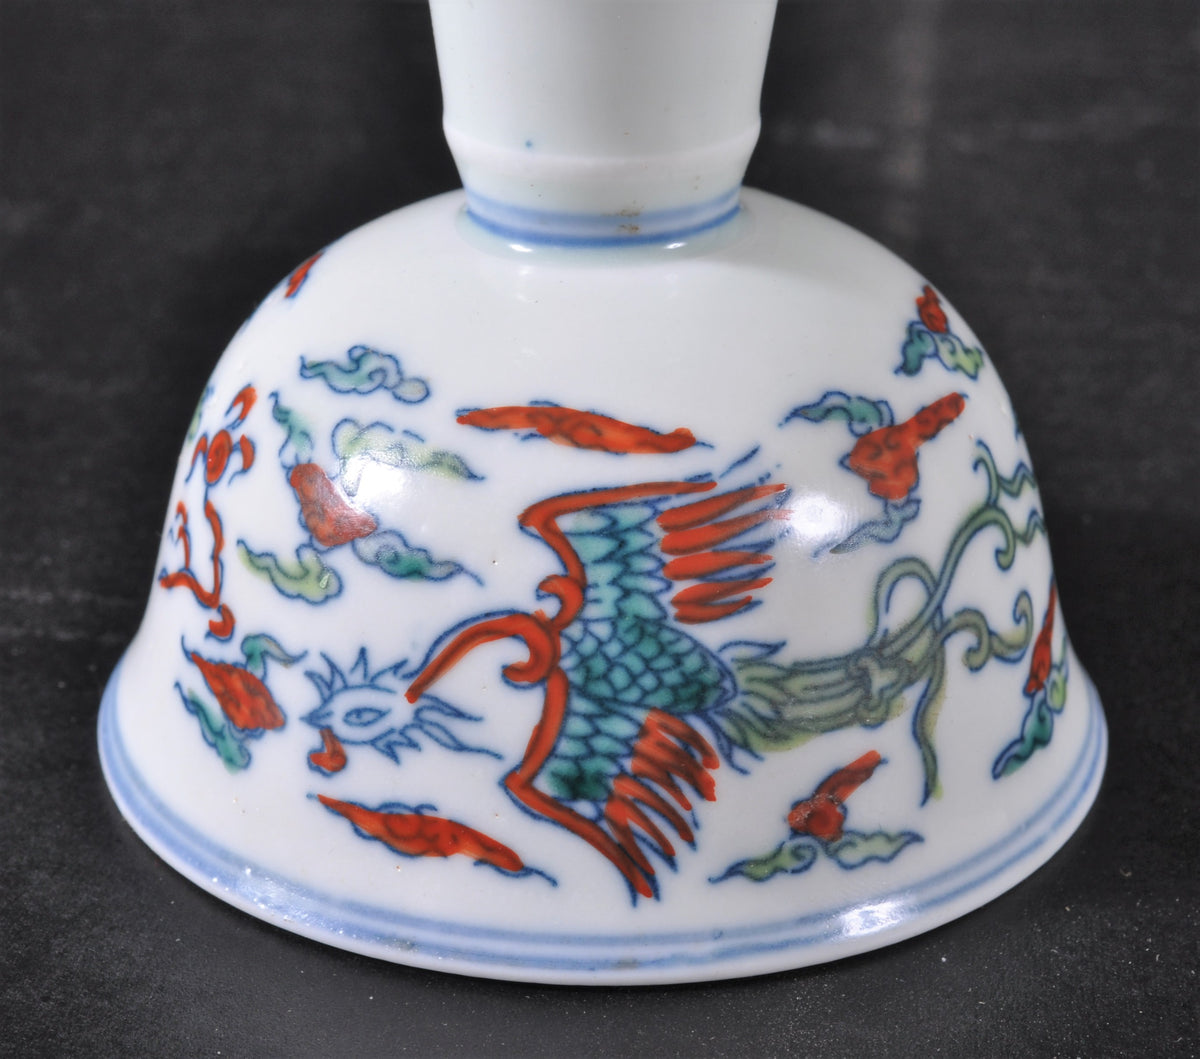 Antique Late 19th Century Chinese Qing Dynasty Stem Cup